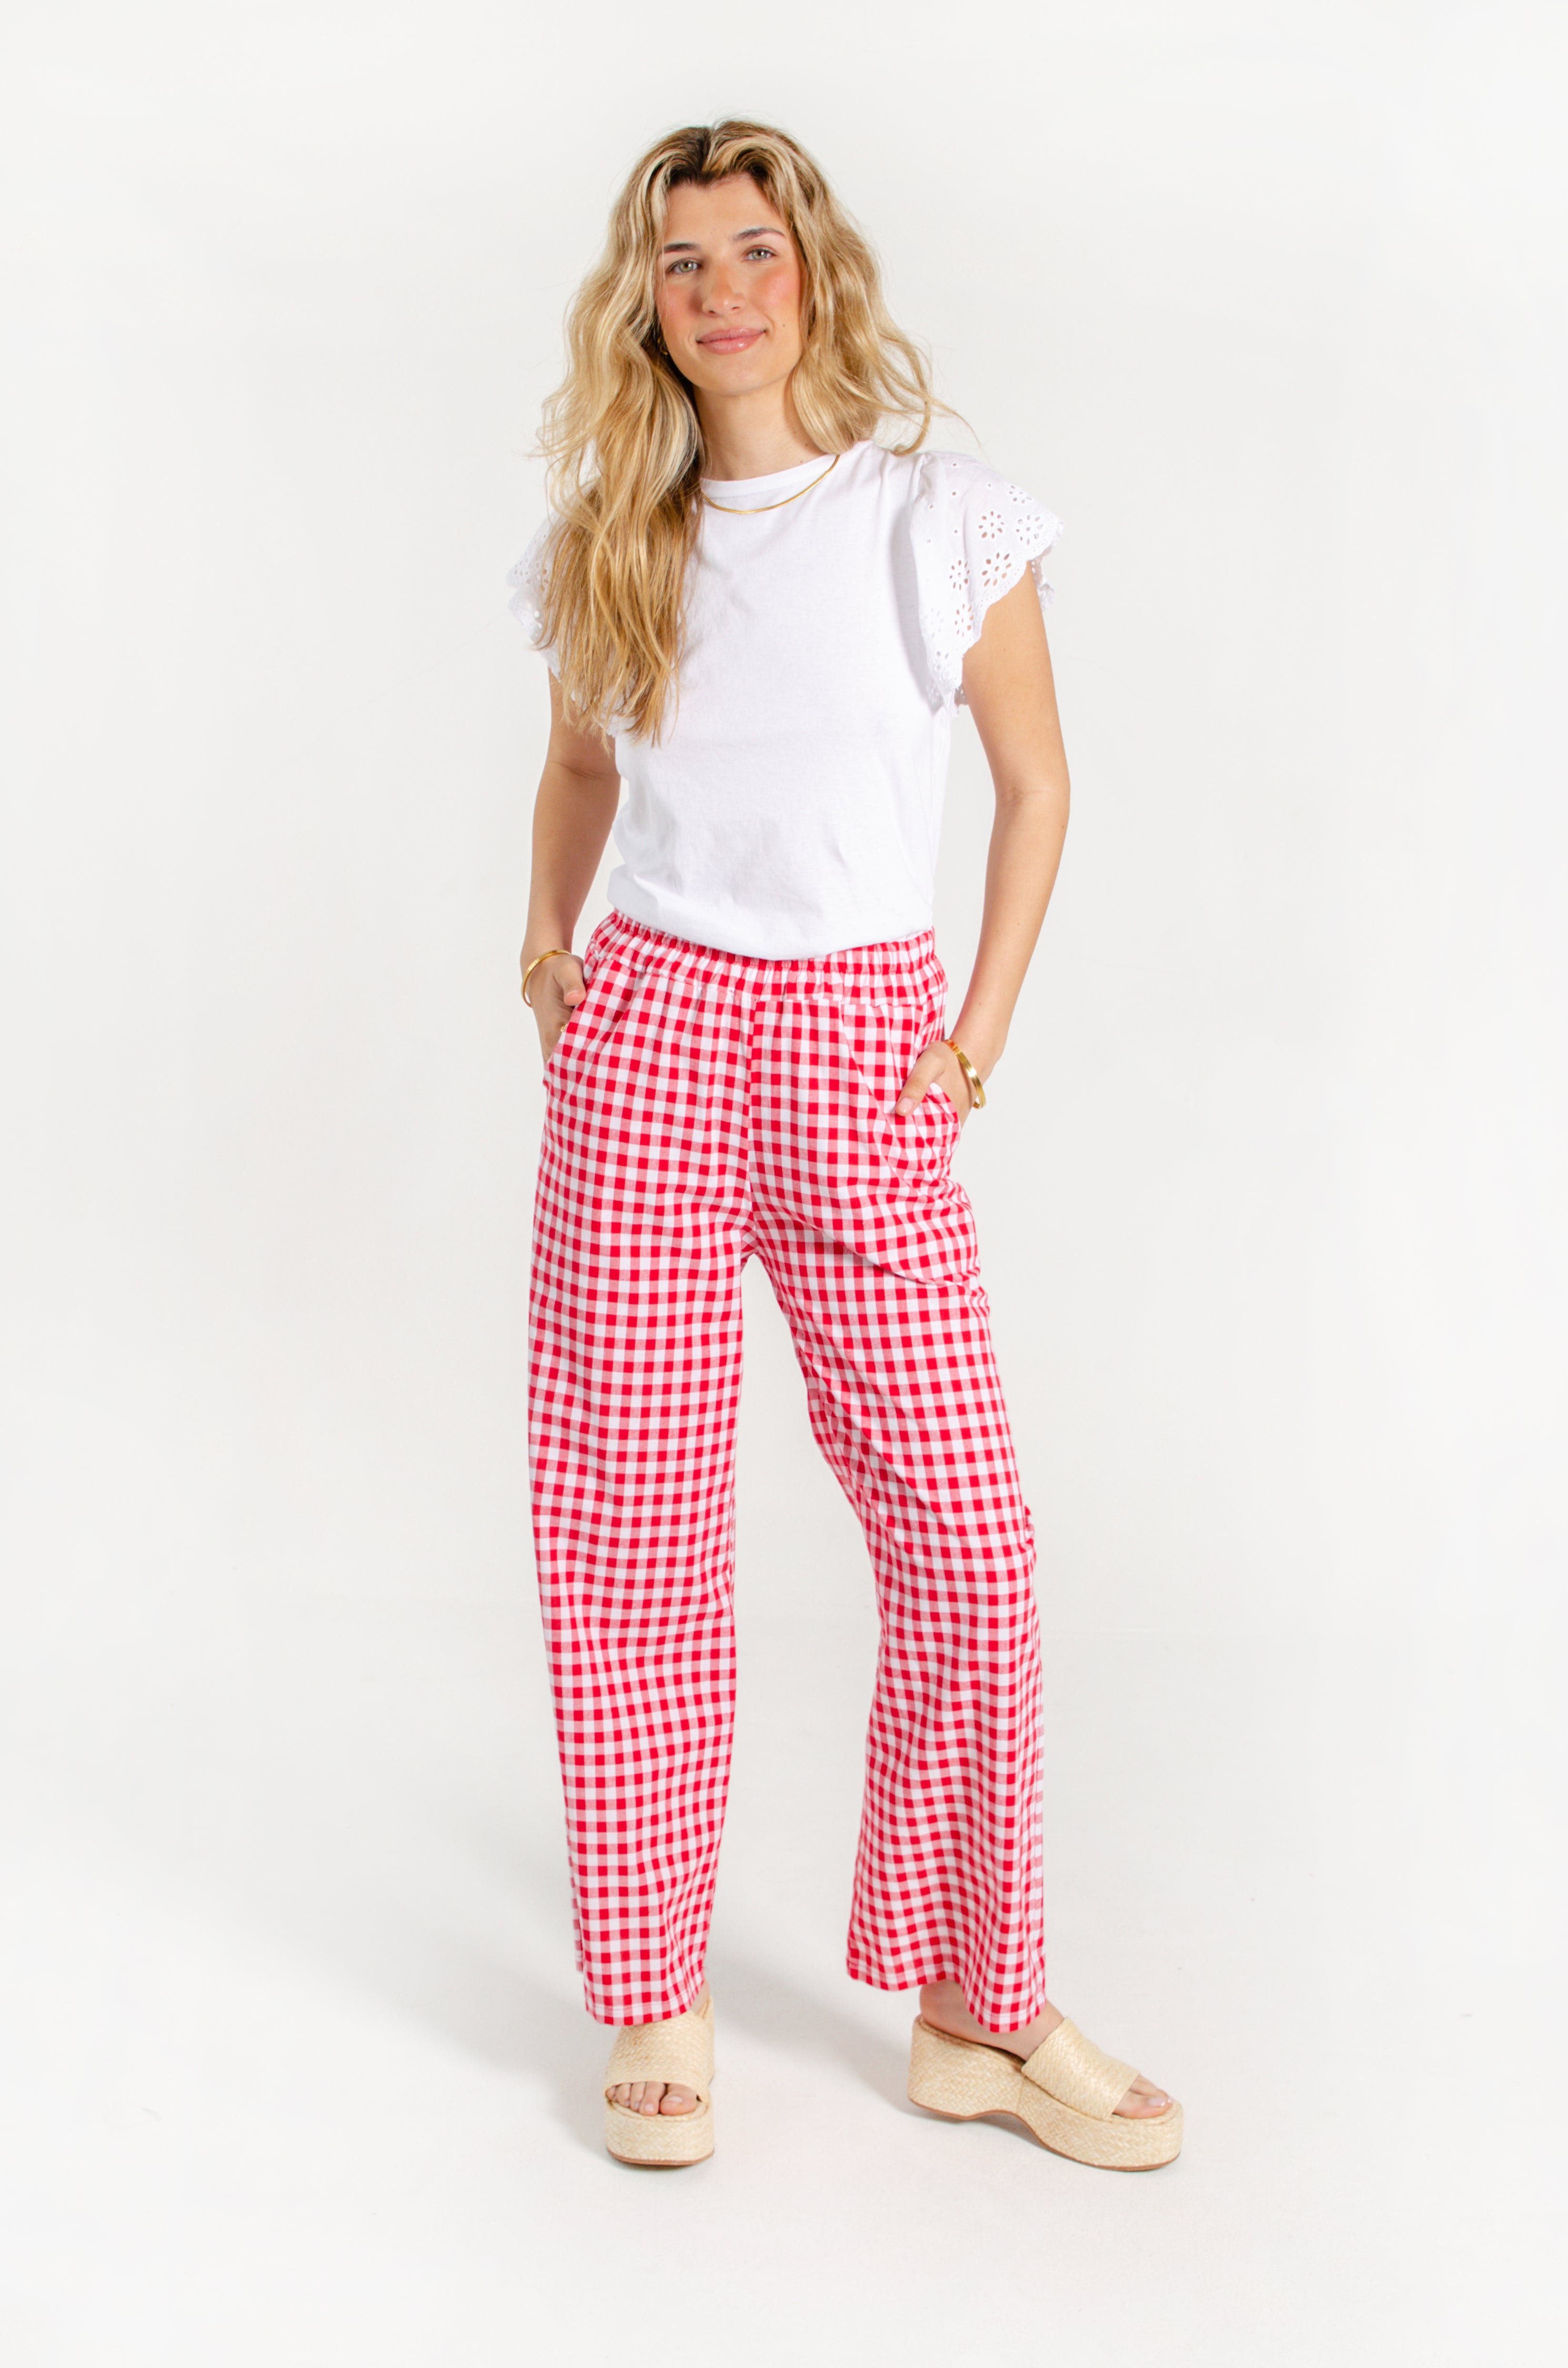 Golftini | Hot Pink Checkered Stretch Ankle Pant | Women's Golf Pant